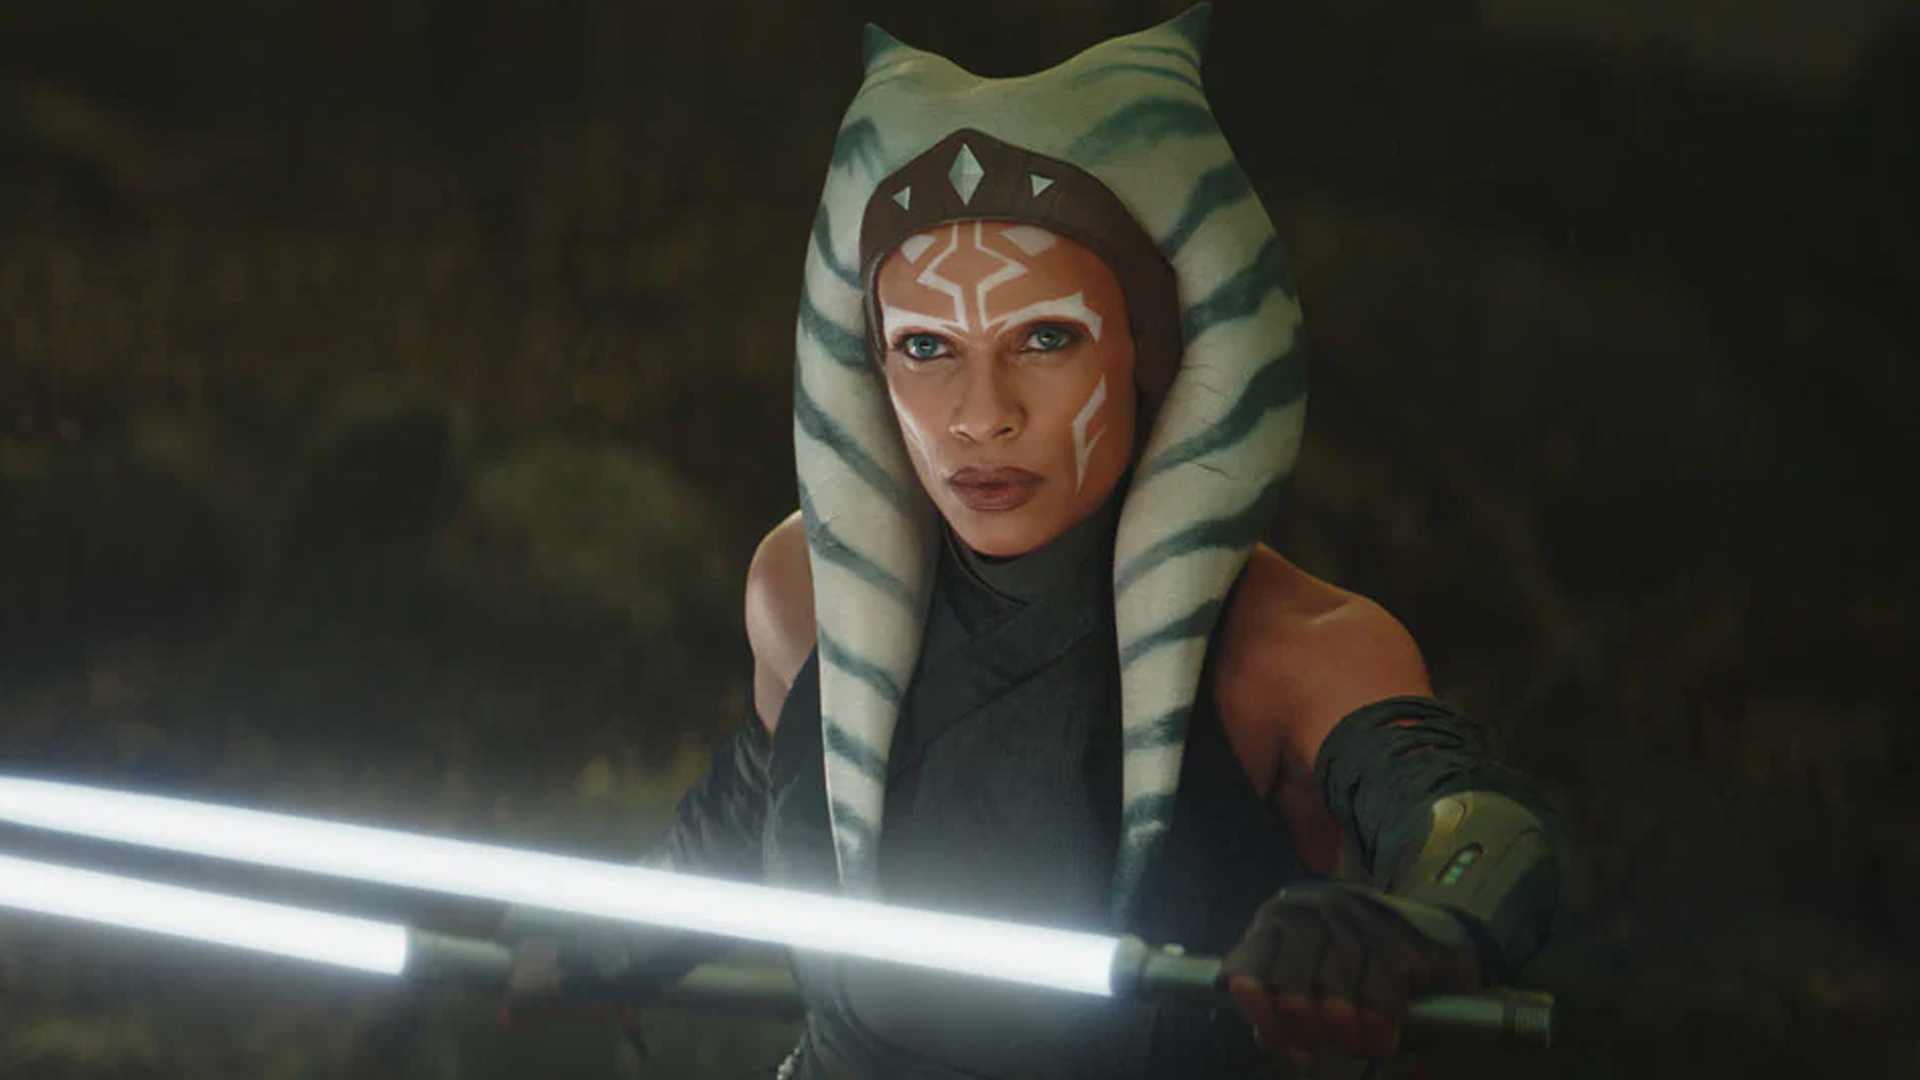 Everything we know about Ahsoka: release date, cast, plot | Space